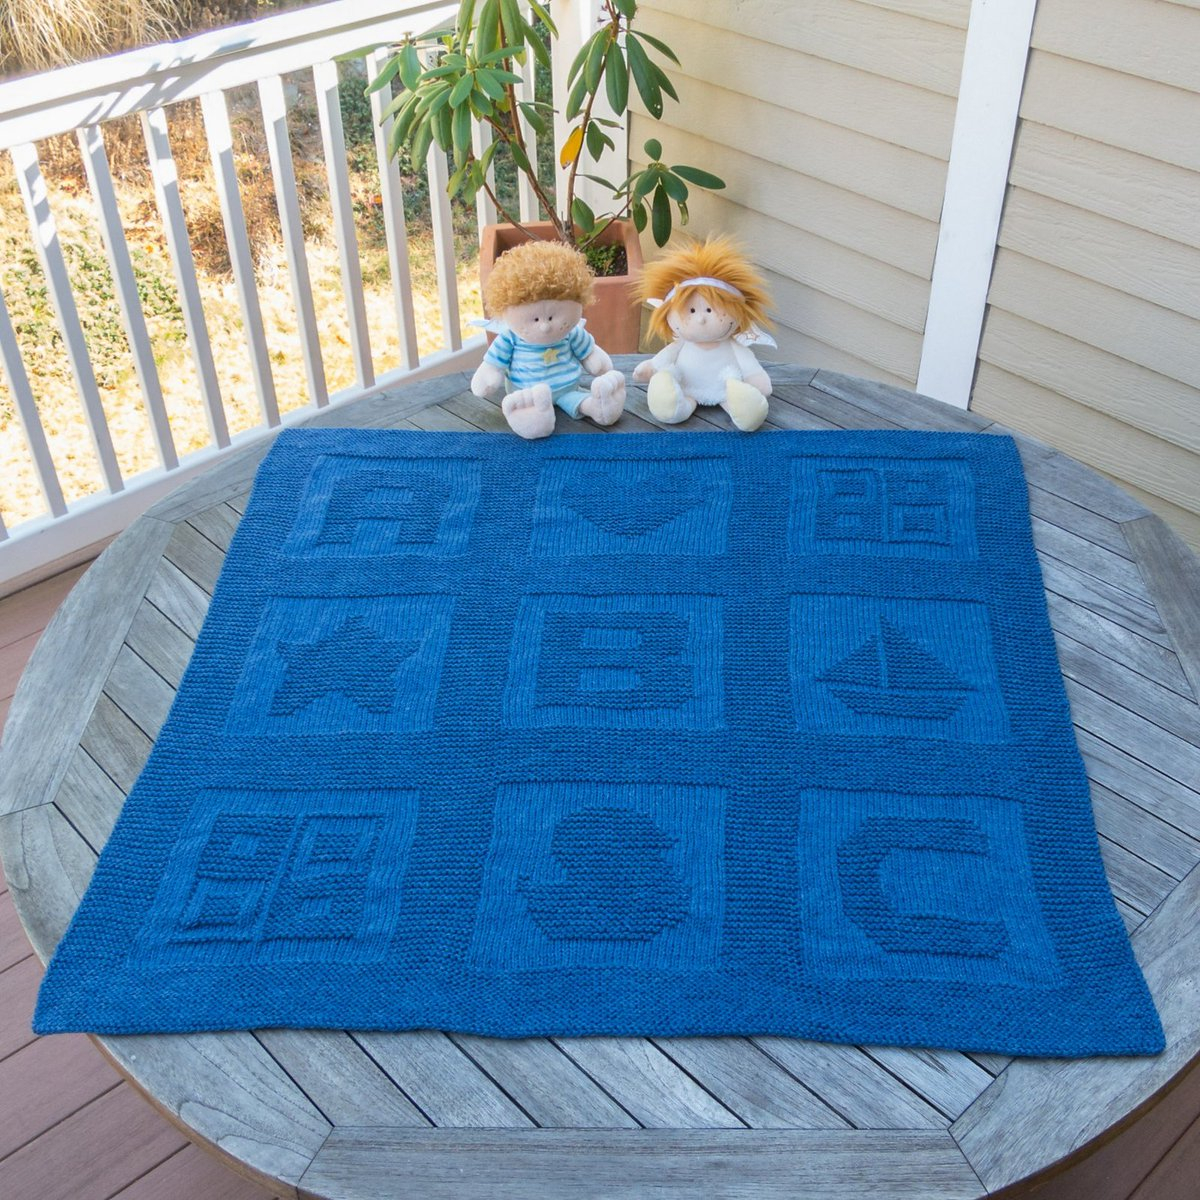 Free Easy Knitting Patterns For Baby Blankets Terry Matz On Twitter Free Knitting Pattern For Easy As Abc Ba